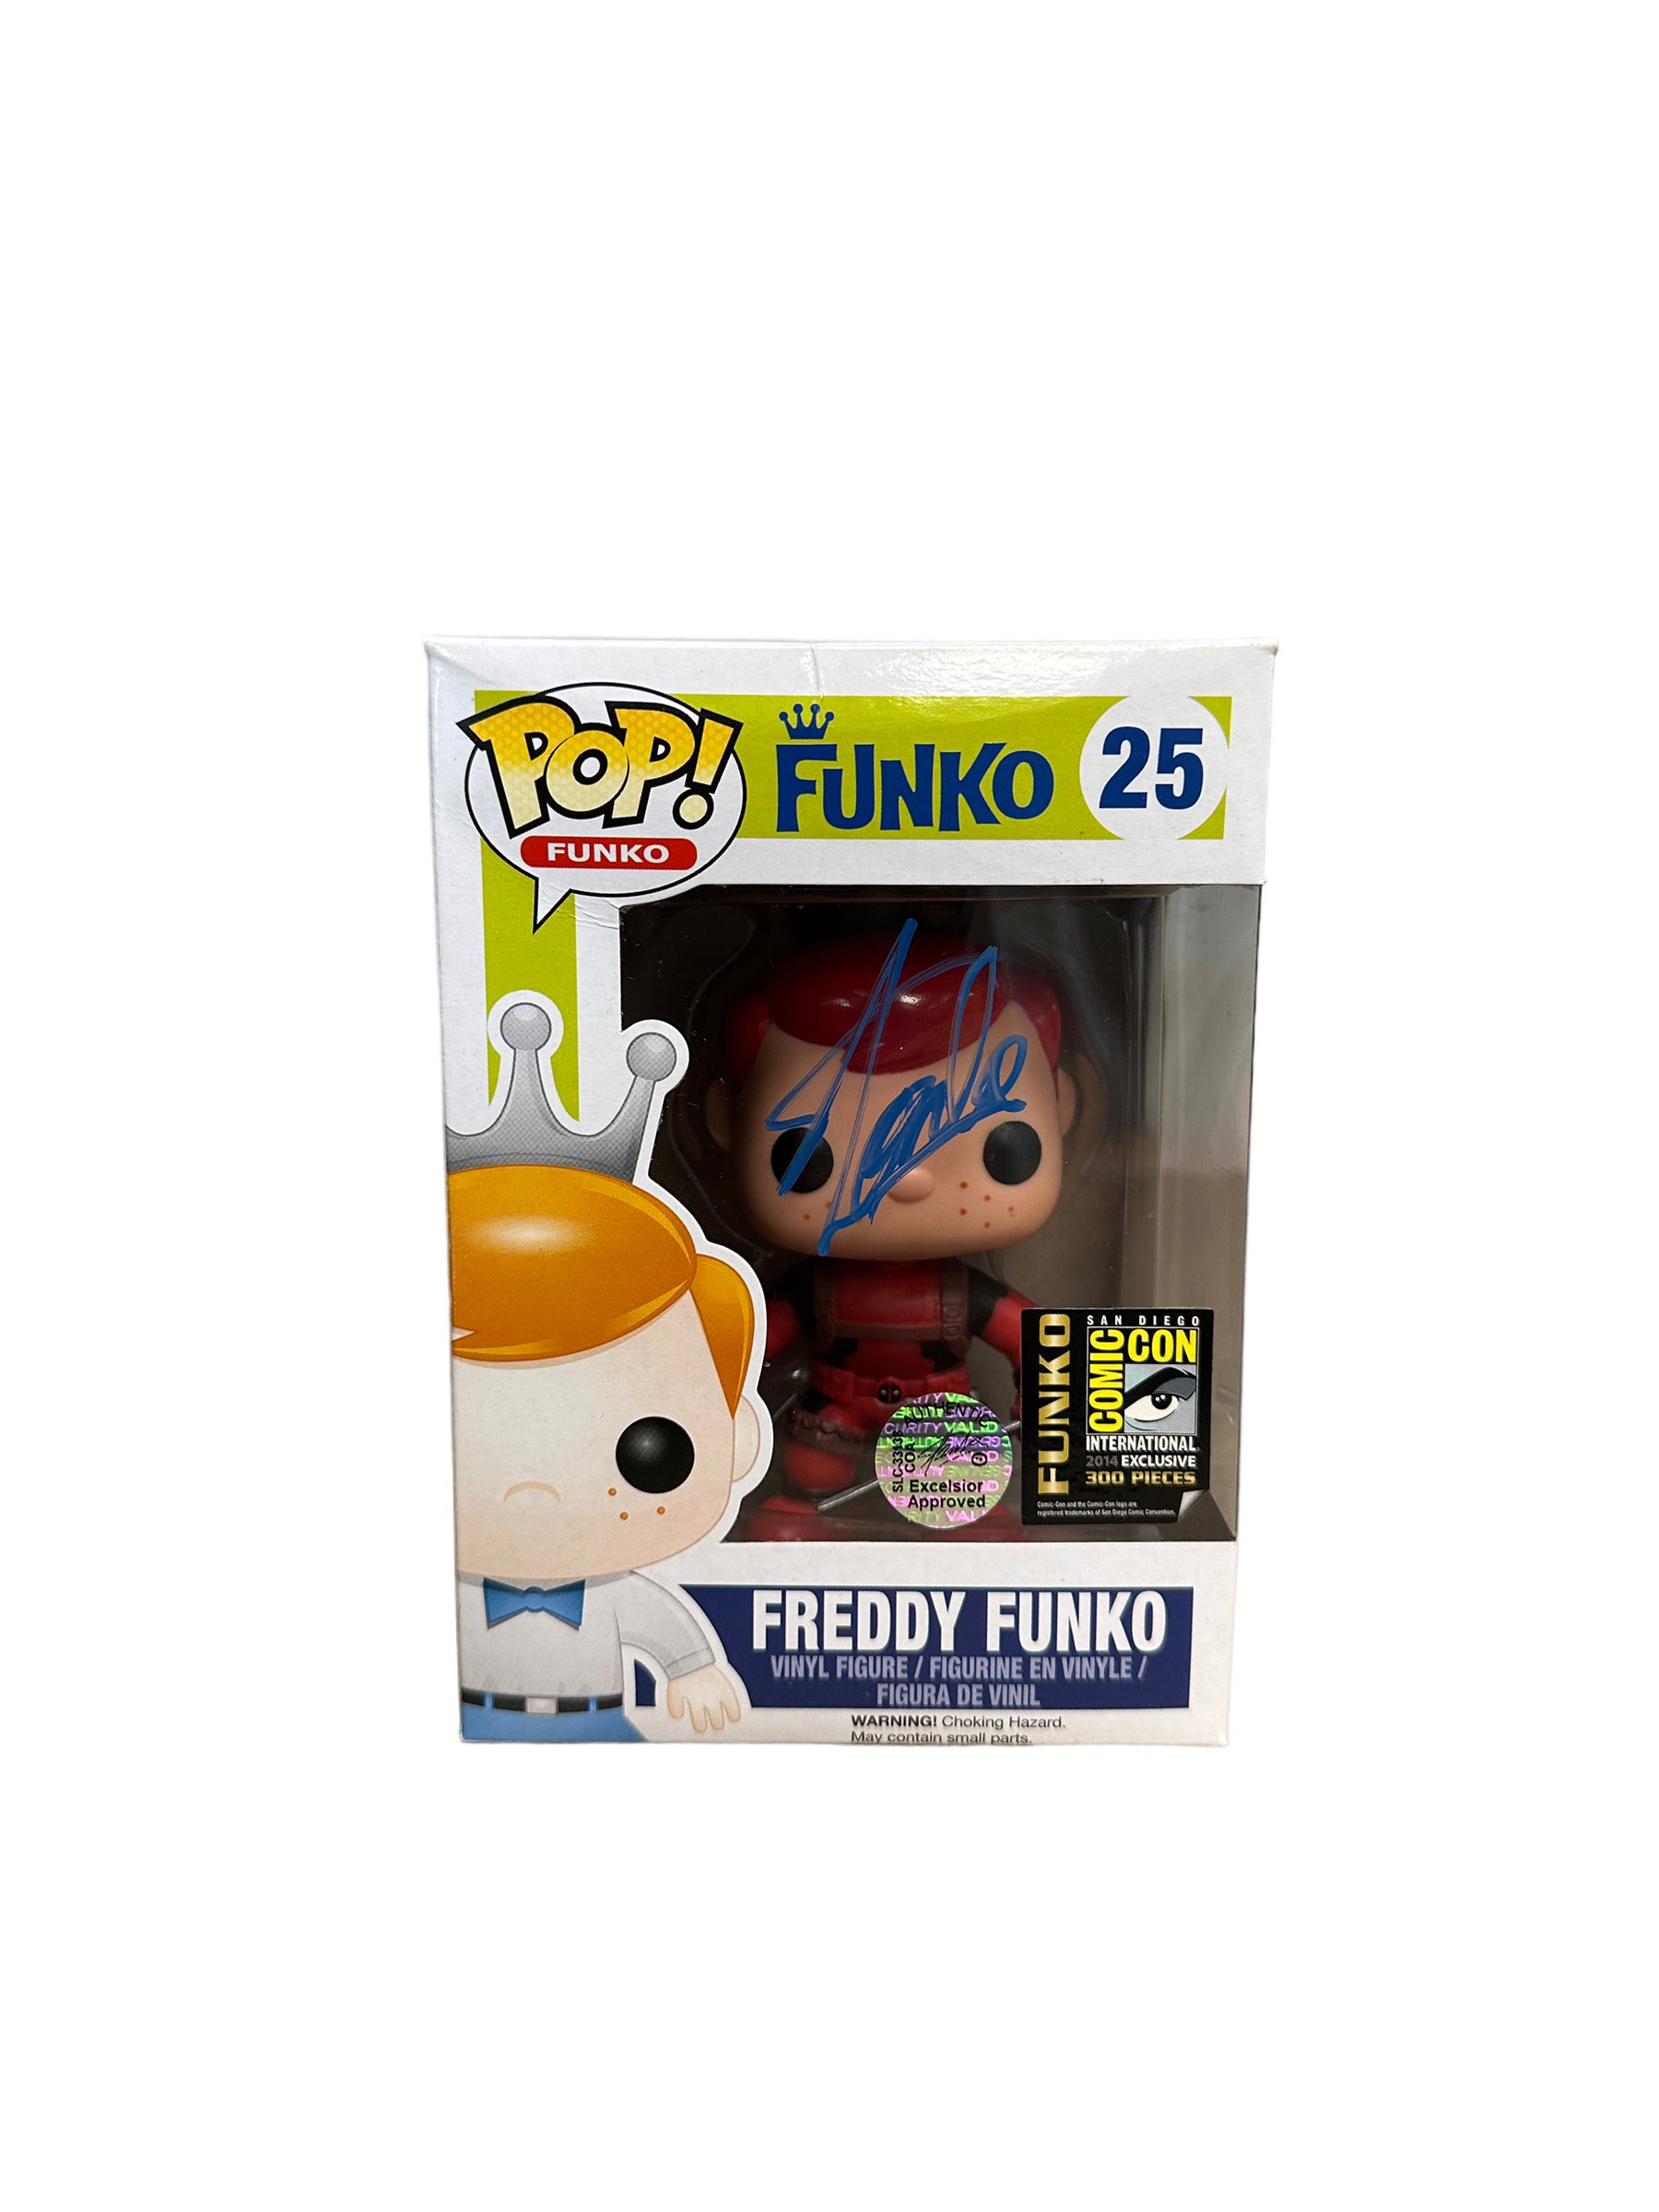 Stan Lee Signed Freddy Funko as Deadpool #25 Funko Pop! - SDCC 2014 Exclusive LE300 Pcs - Condition 7.5/10 - Excelsior Approved COA